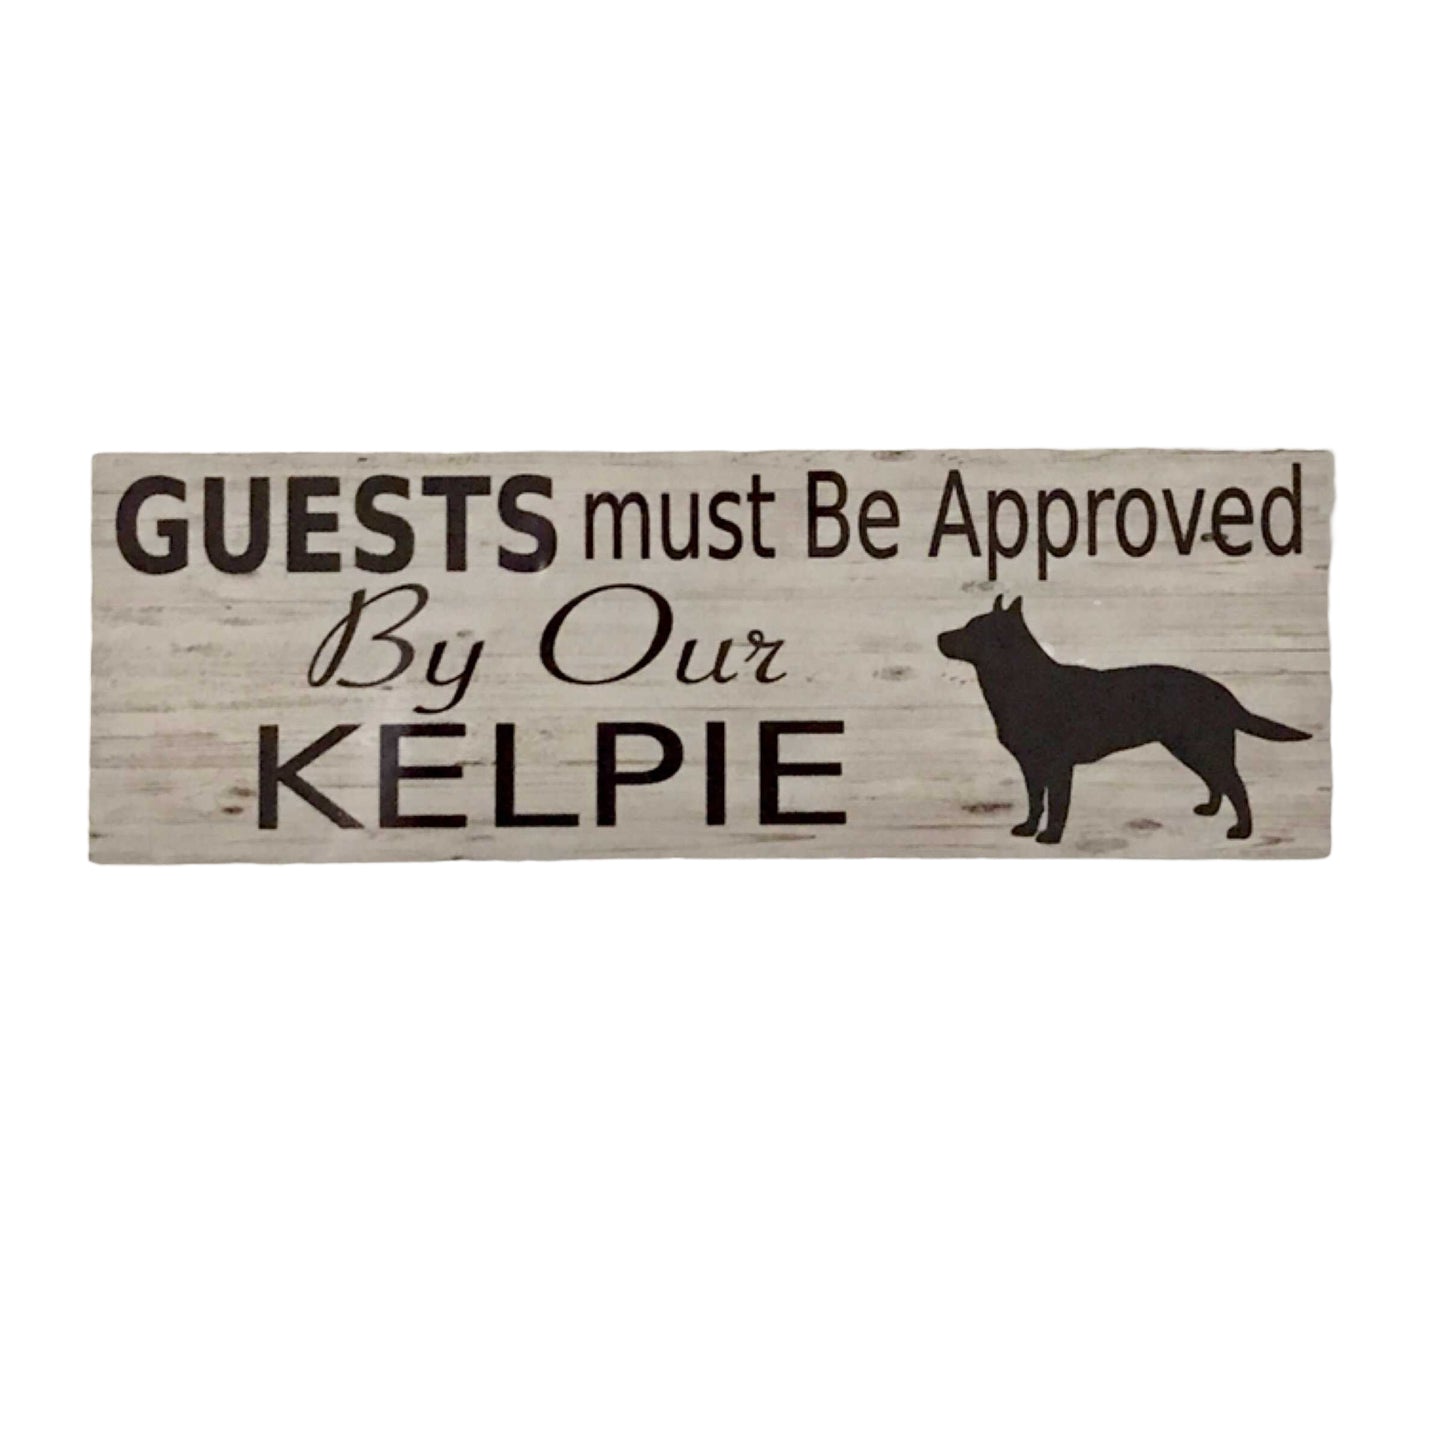 Kelpie Dog Guests Must Be Approved By Our Sign